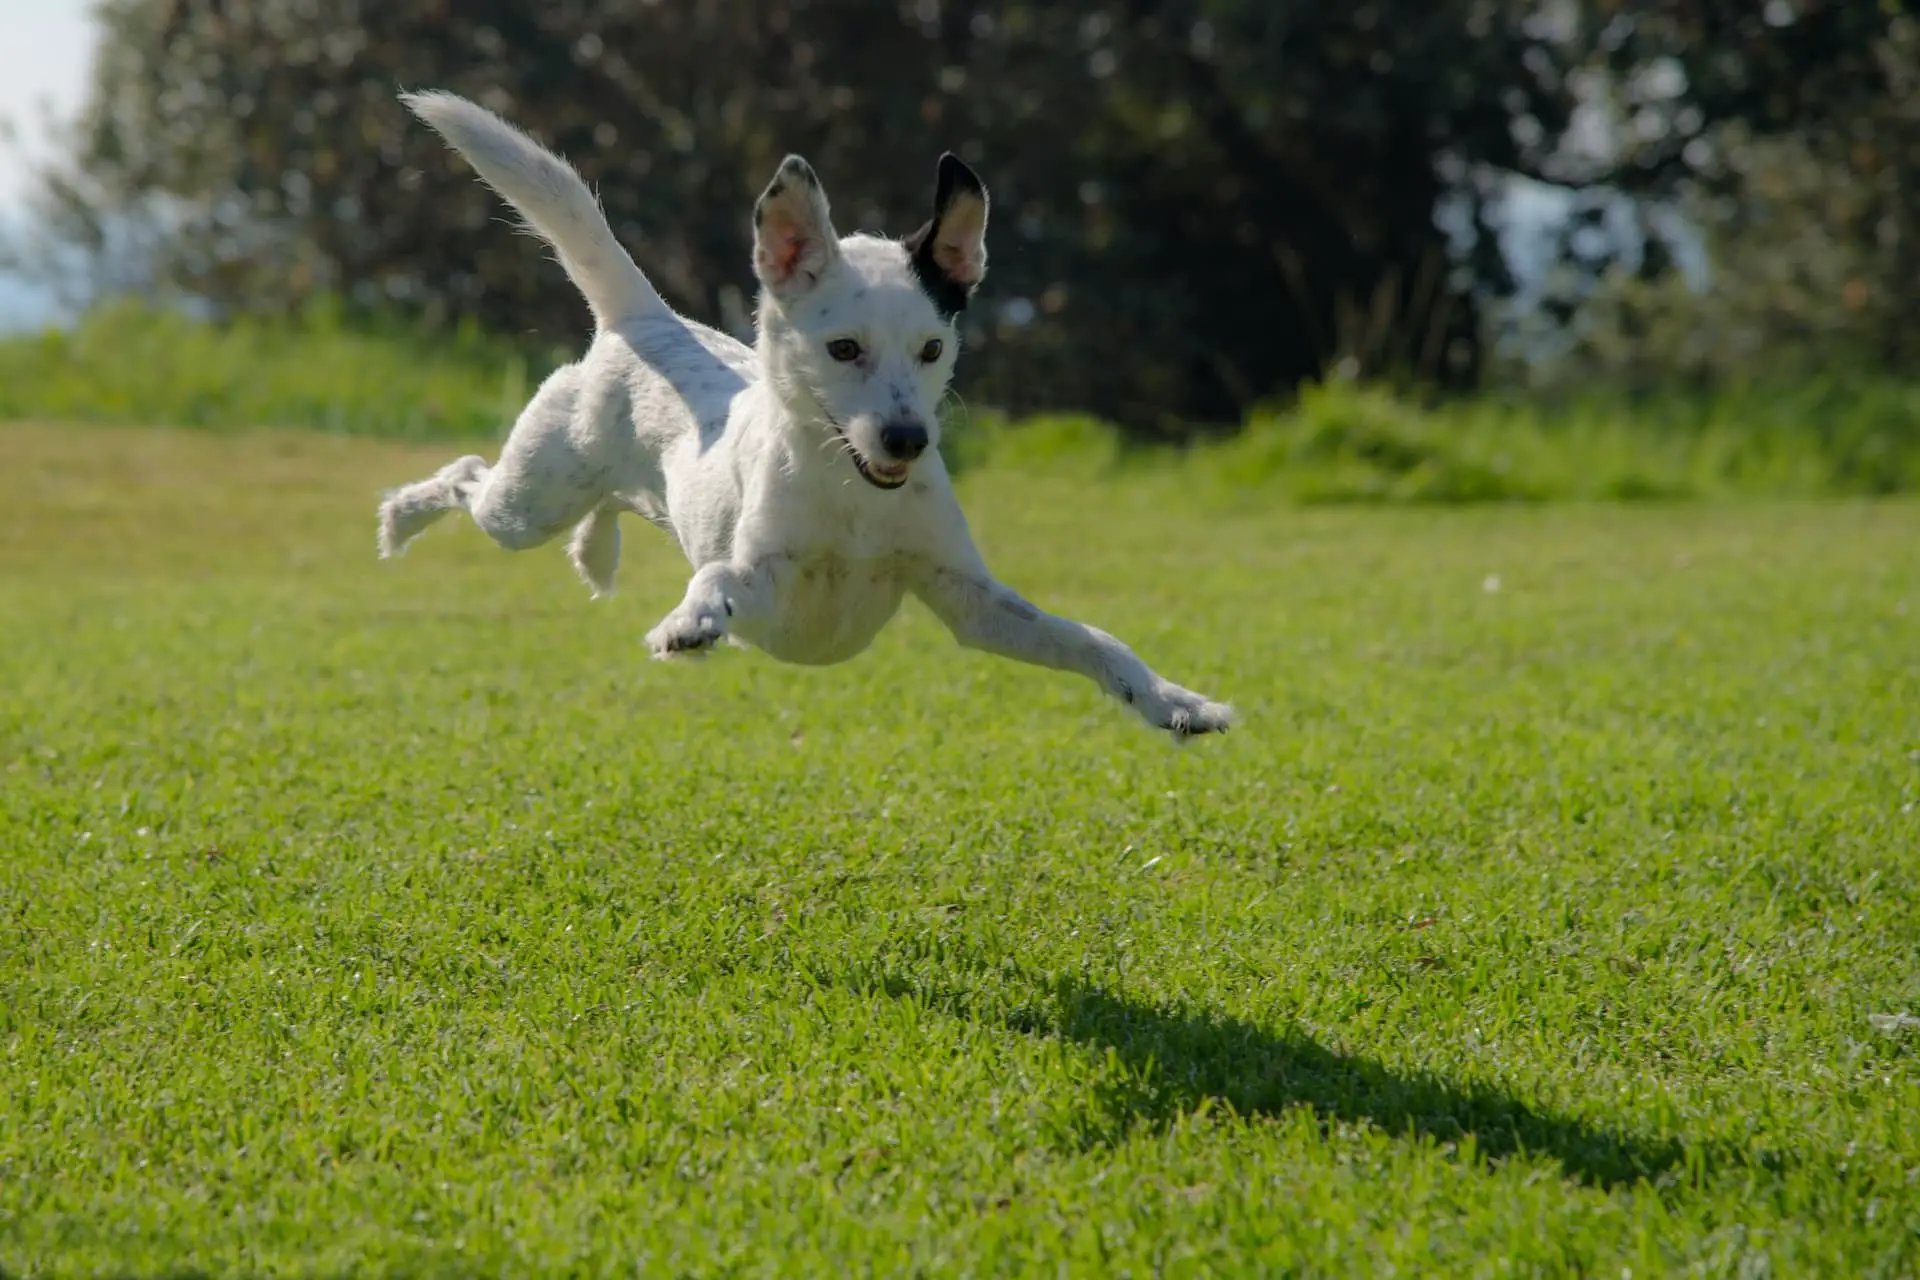 Dog jumping in field